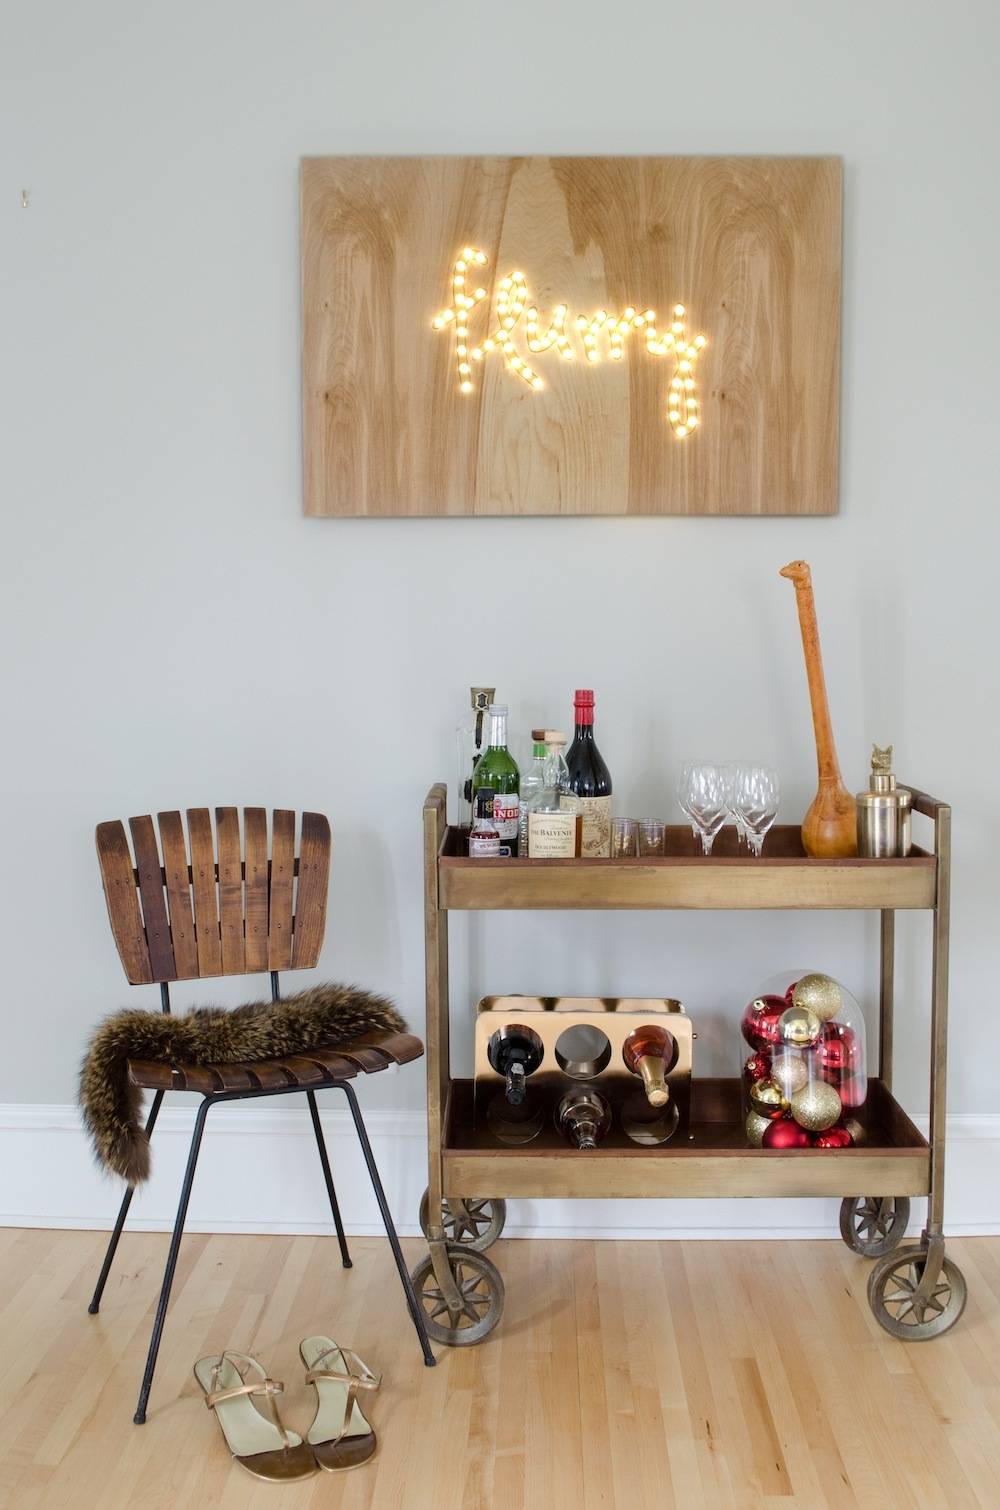 Metal rolling tray with wine bottles and decorations near wooden chair with metal legs.